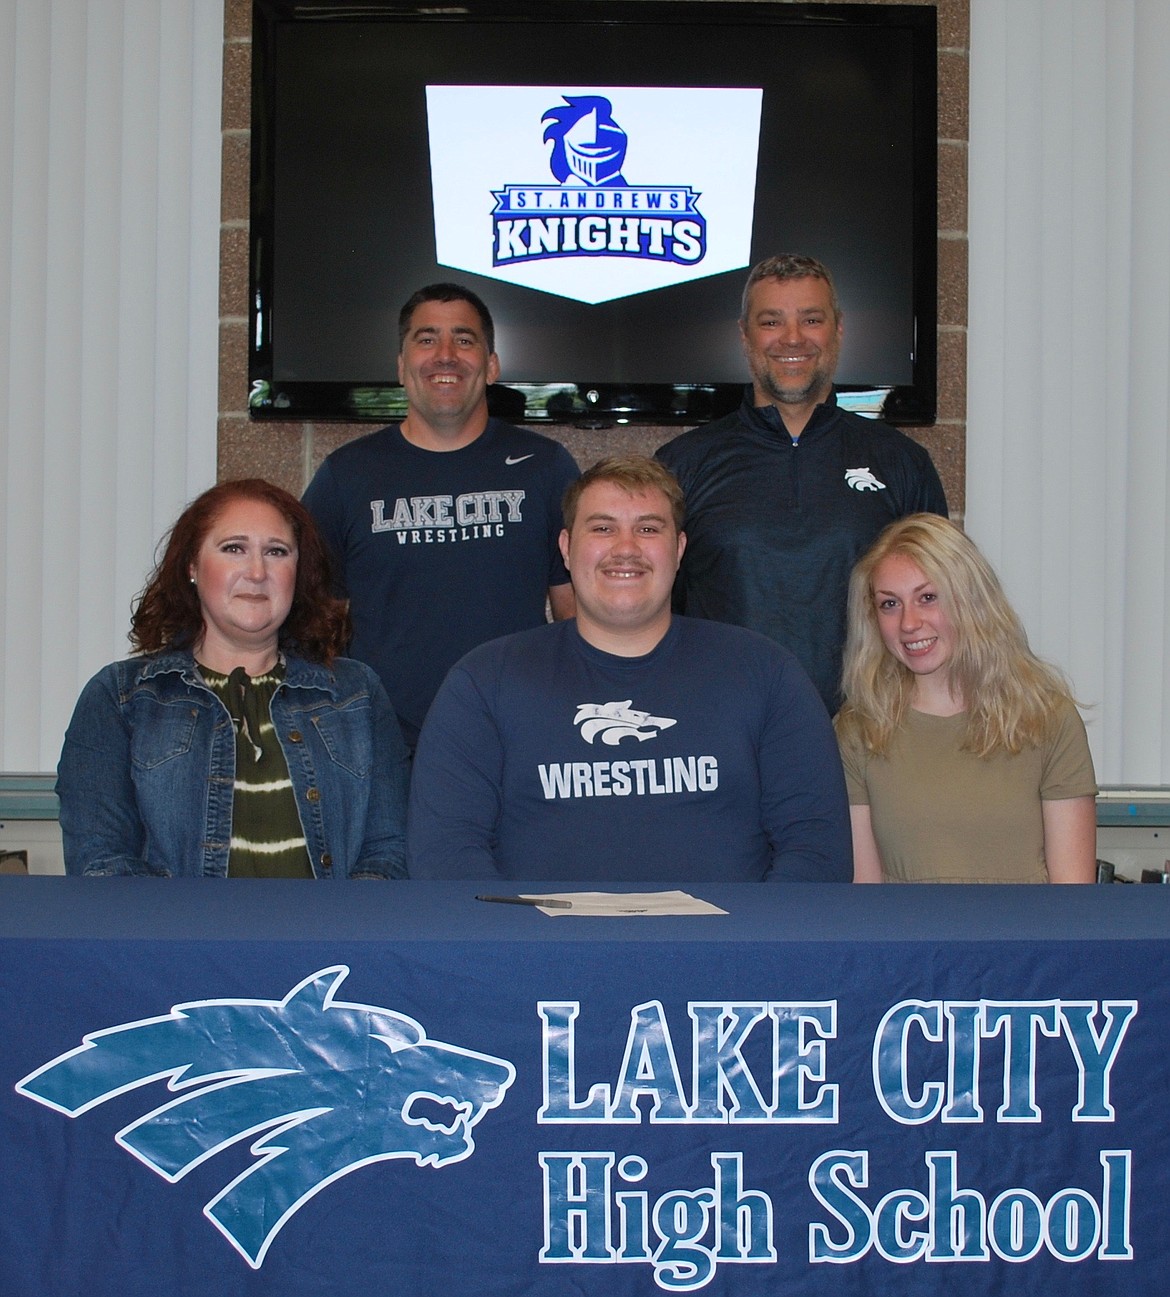 Lake City High senior Owen Hughes recently signed a letter of intent to wrestle at NAIA St. Andrews University in Laurinburg, N.C. Seated from left are Mercedes Hughes (mom), Owen Hughes and Morgan Hughes (sister); and standing from left, Corey Owen, Lake City High head wrestling coach; and Bryan Kelly, Lake City High assistant principal.